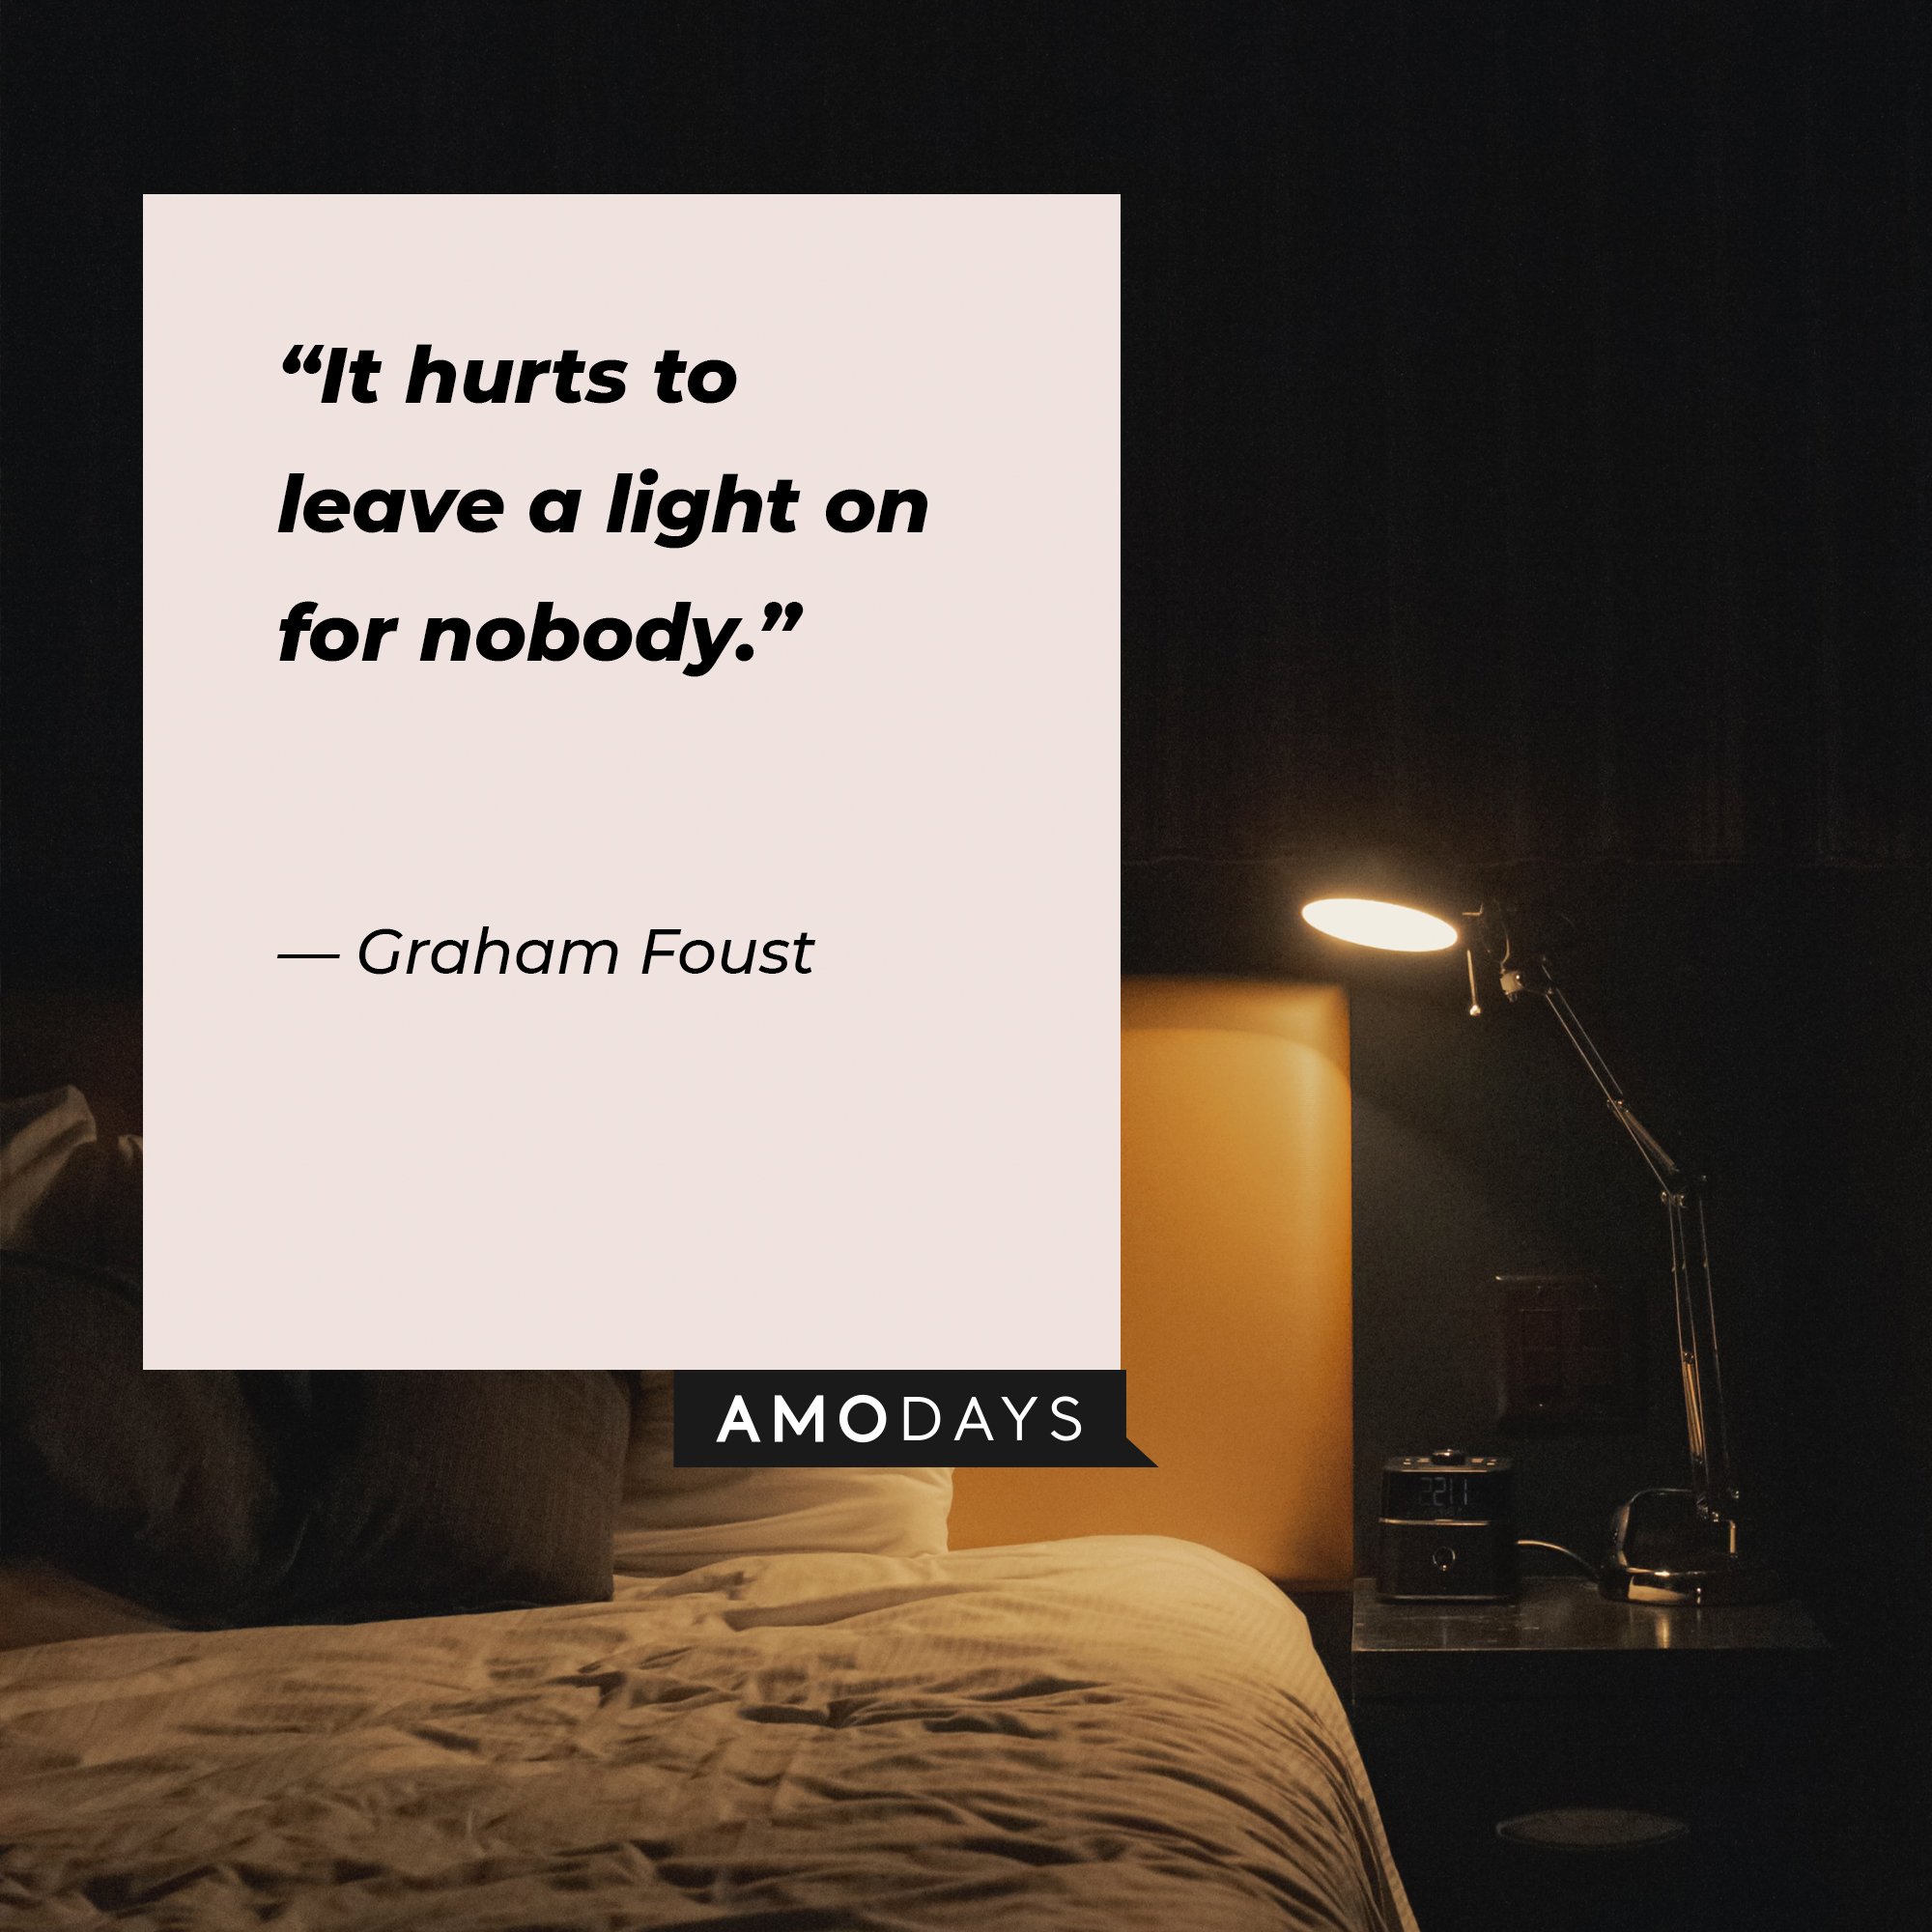 Graham Foust’s quote: “It hurts to leave a light on for nobody.” | Image: AmoDays